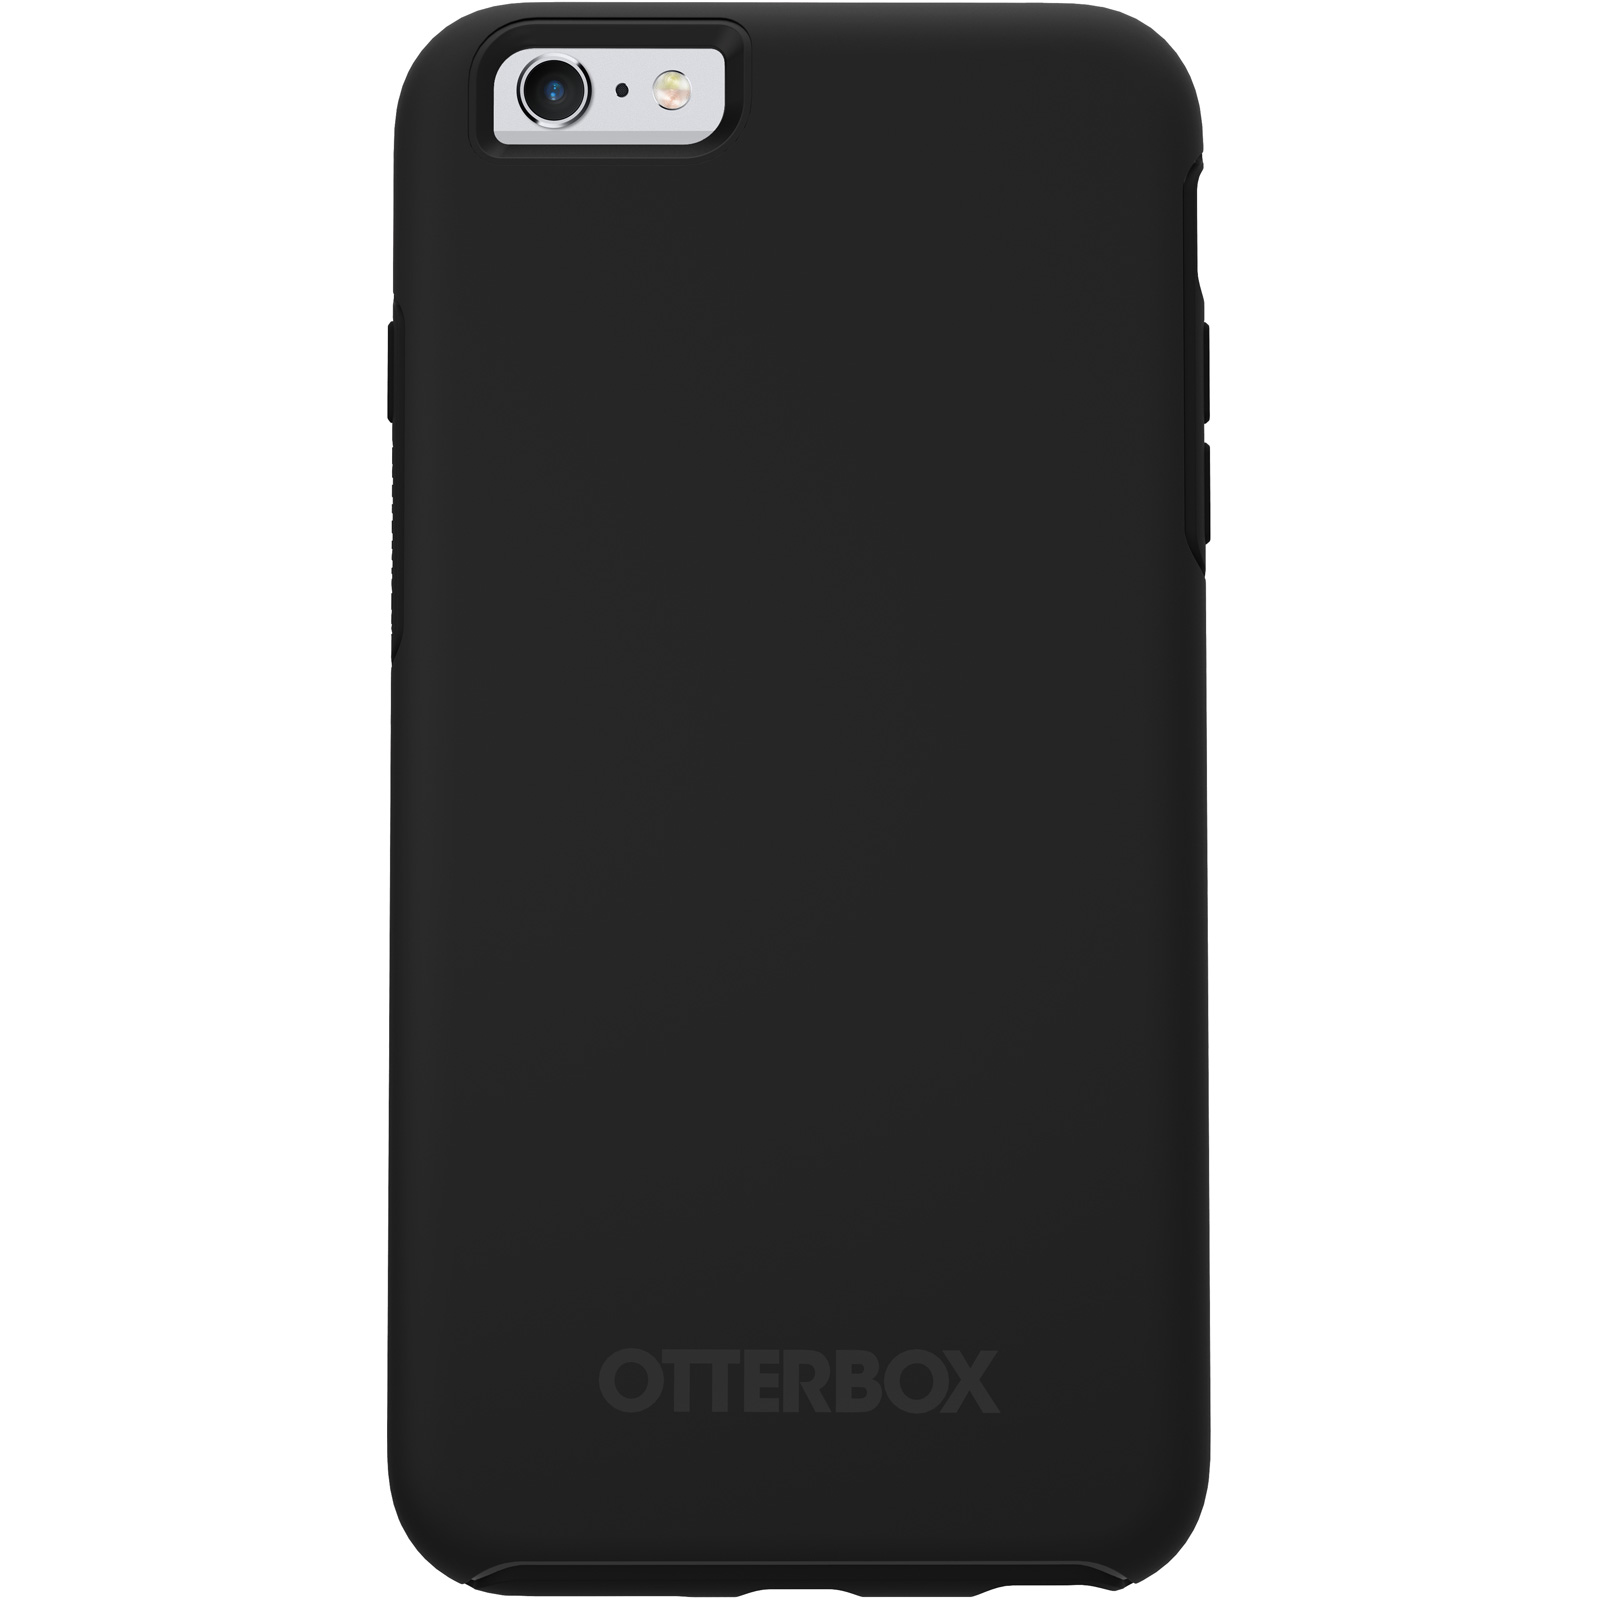 Symmetry Series Case for iPhone 6/6s Black